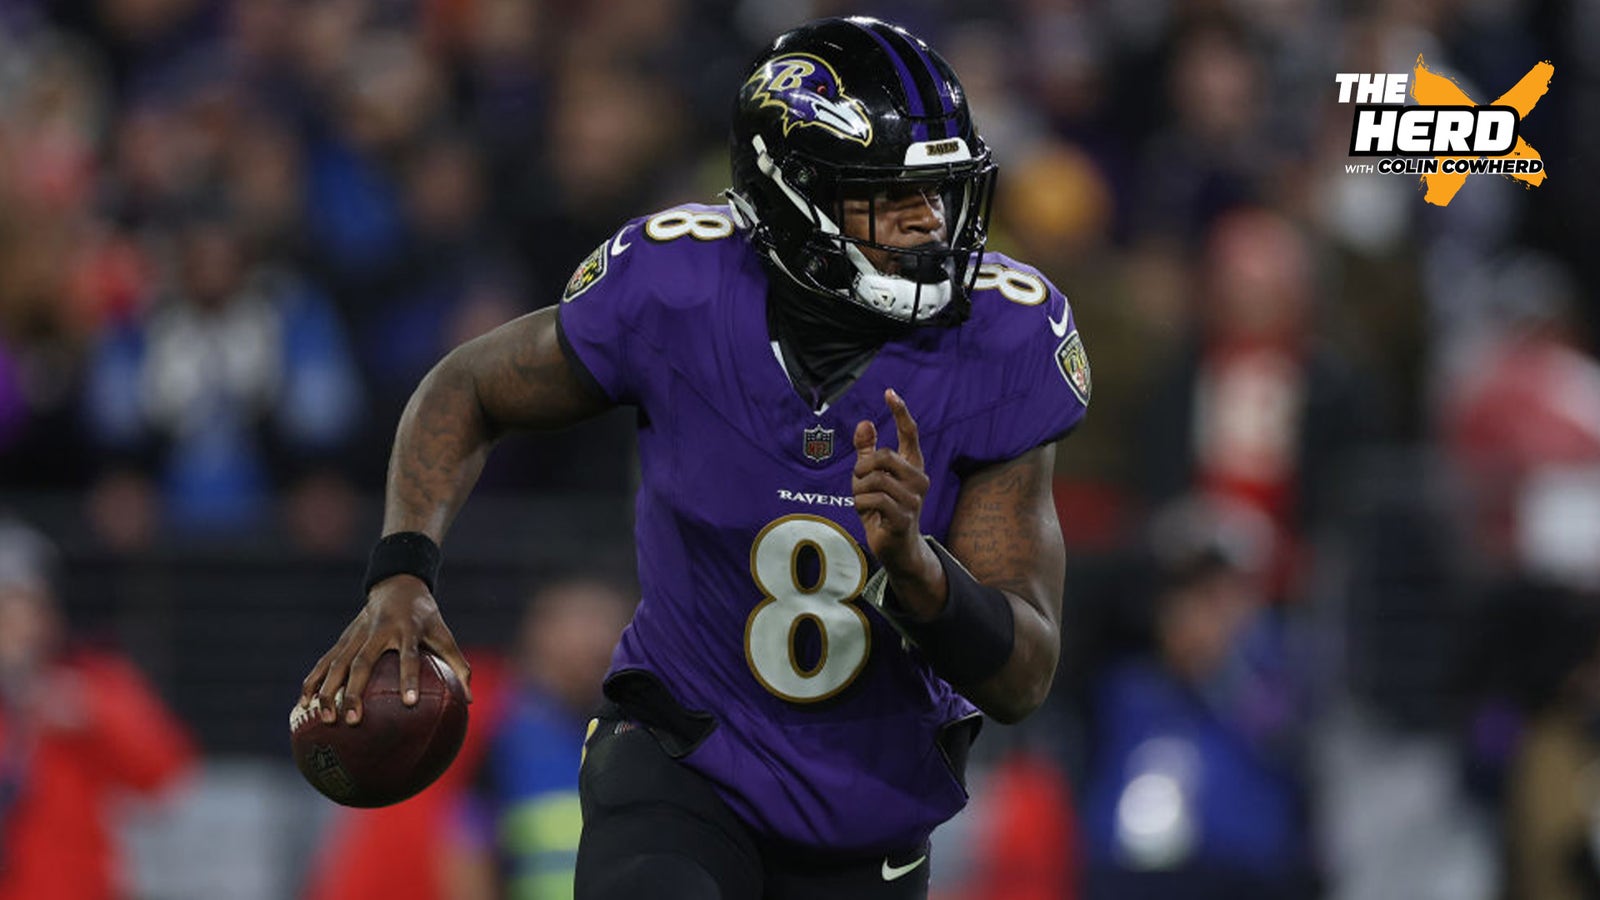 Ravens offense "unrecognizable" in AFC Championship loss to Chiefs